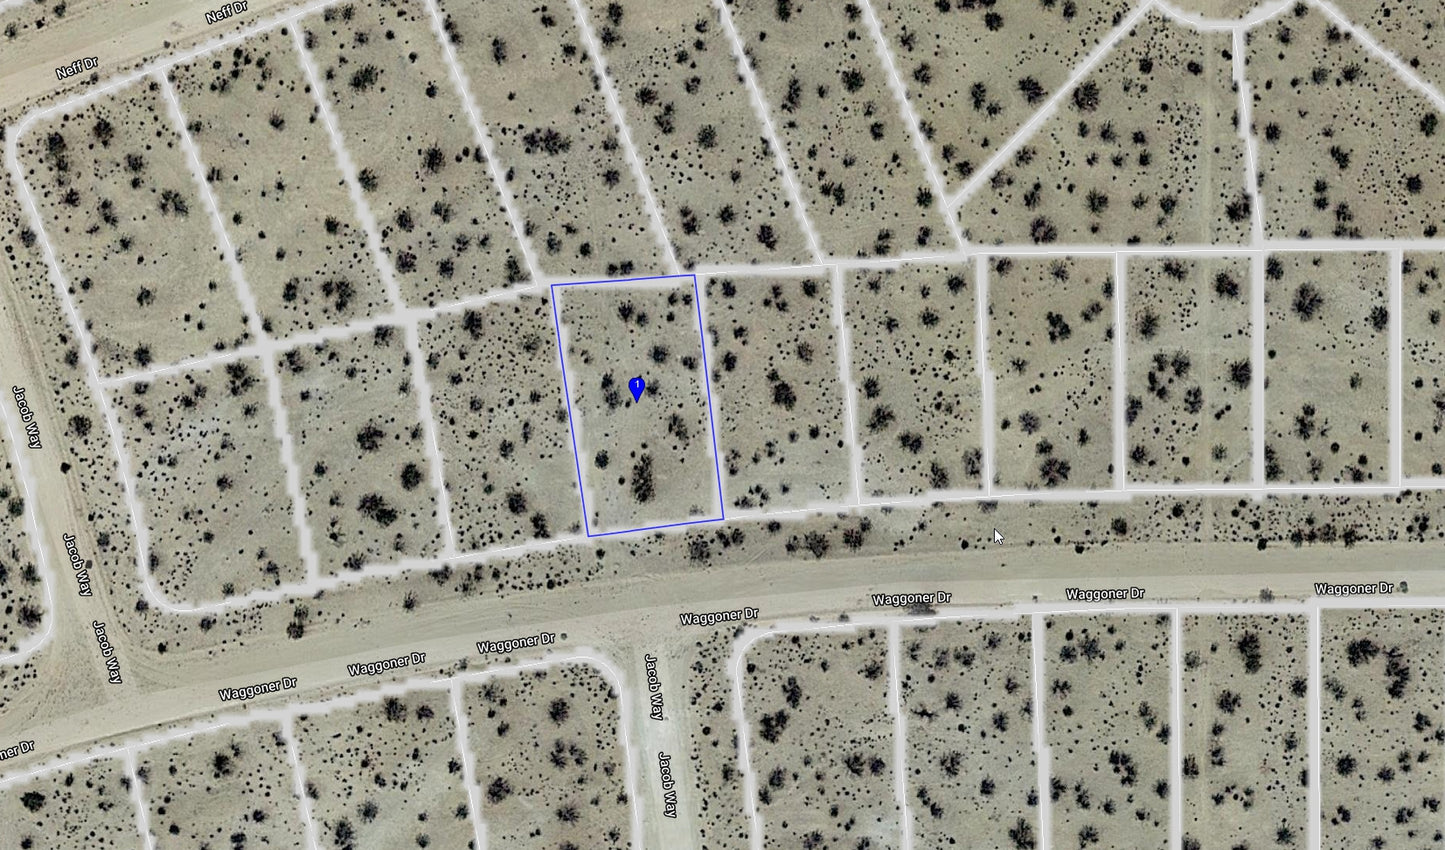 L40034-1 .21 Acre Residential lot in California City, Kern County, CA $3,499.00 ($70.14/Month)